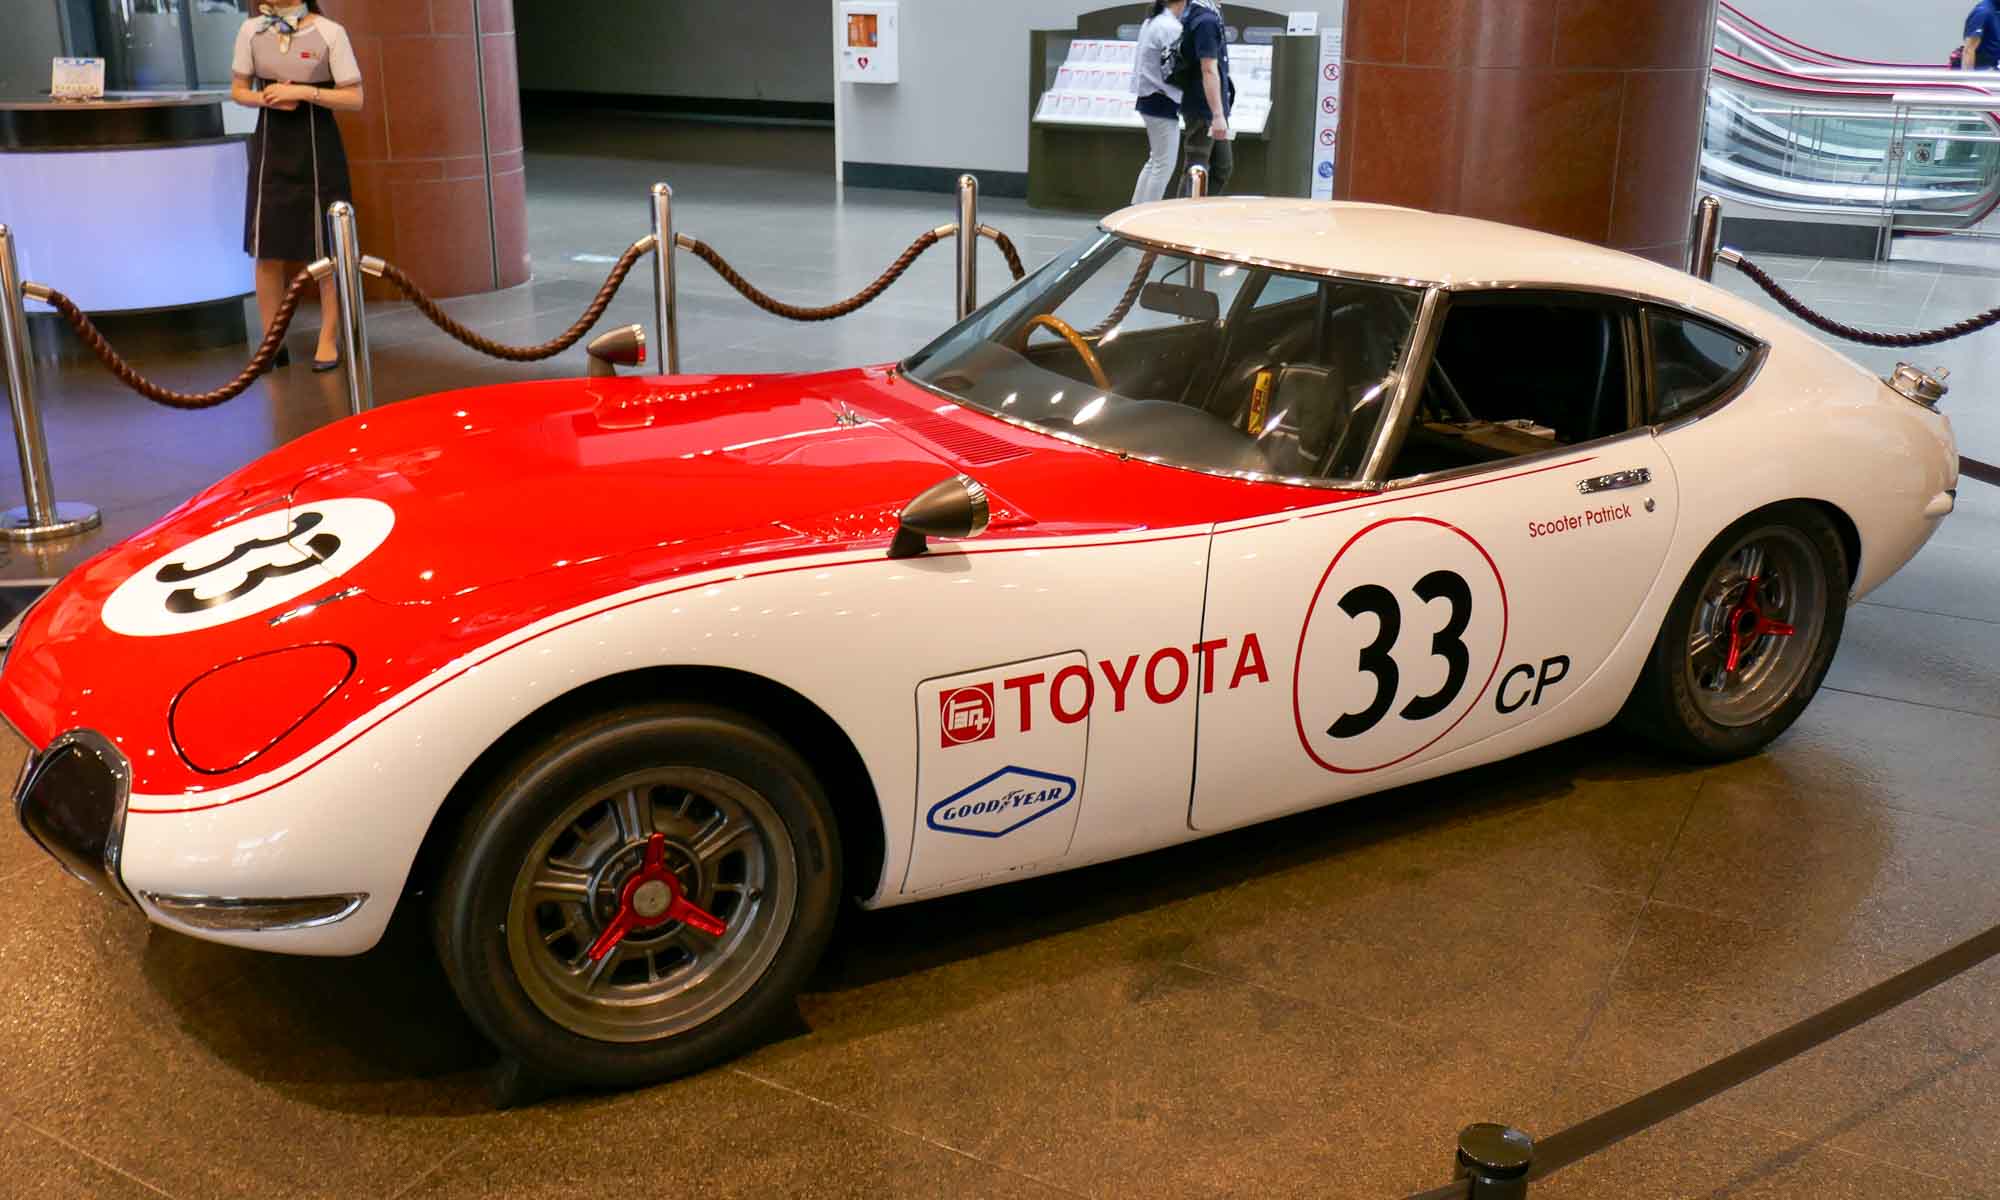 Toyota Shelby 2000 GT, 1967